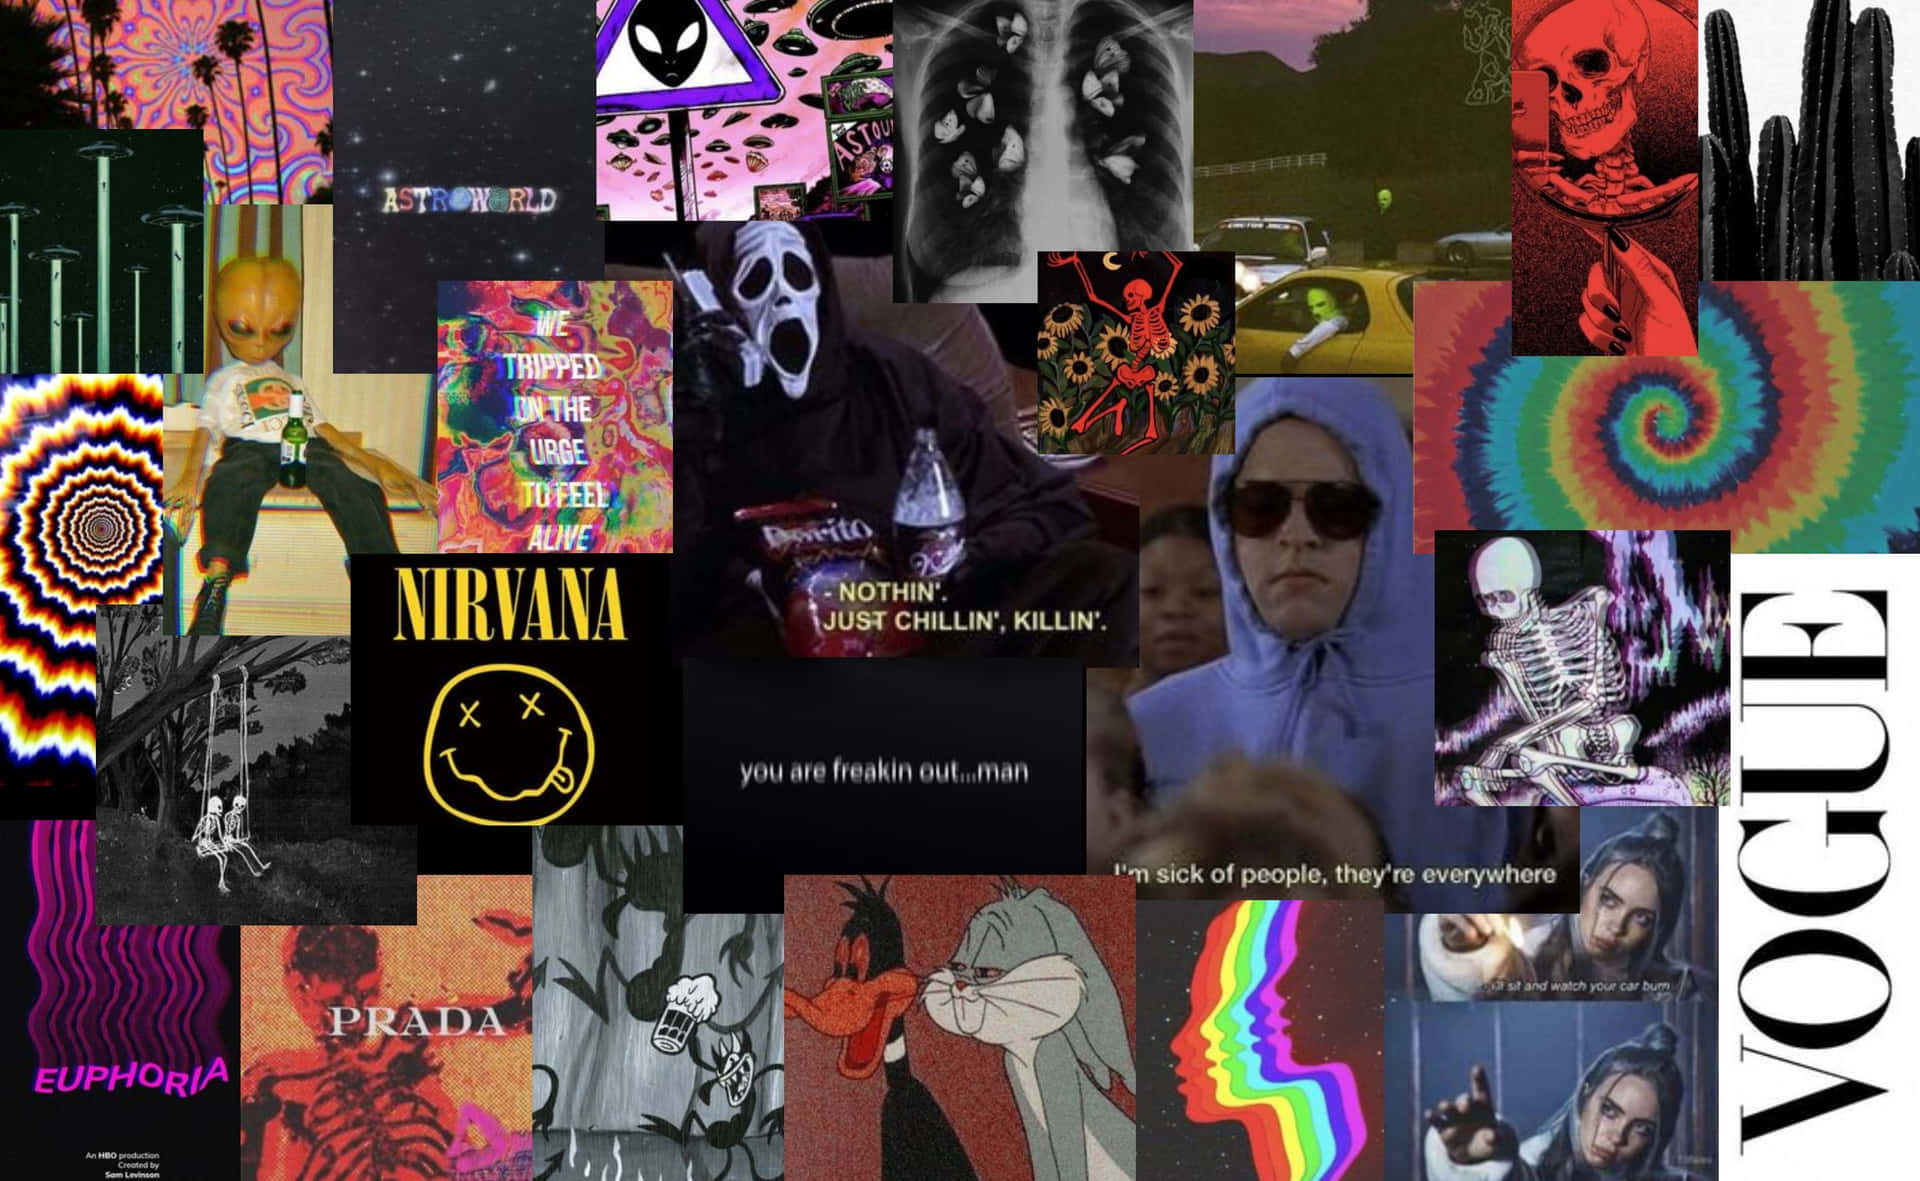 A Collage Of Images With The Words Vogue And A Skull Wallpaper